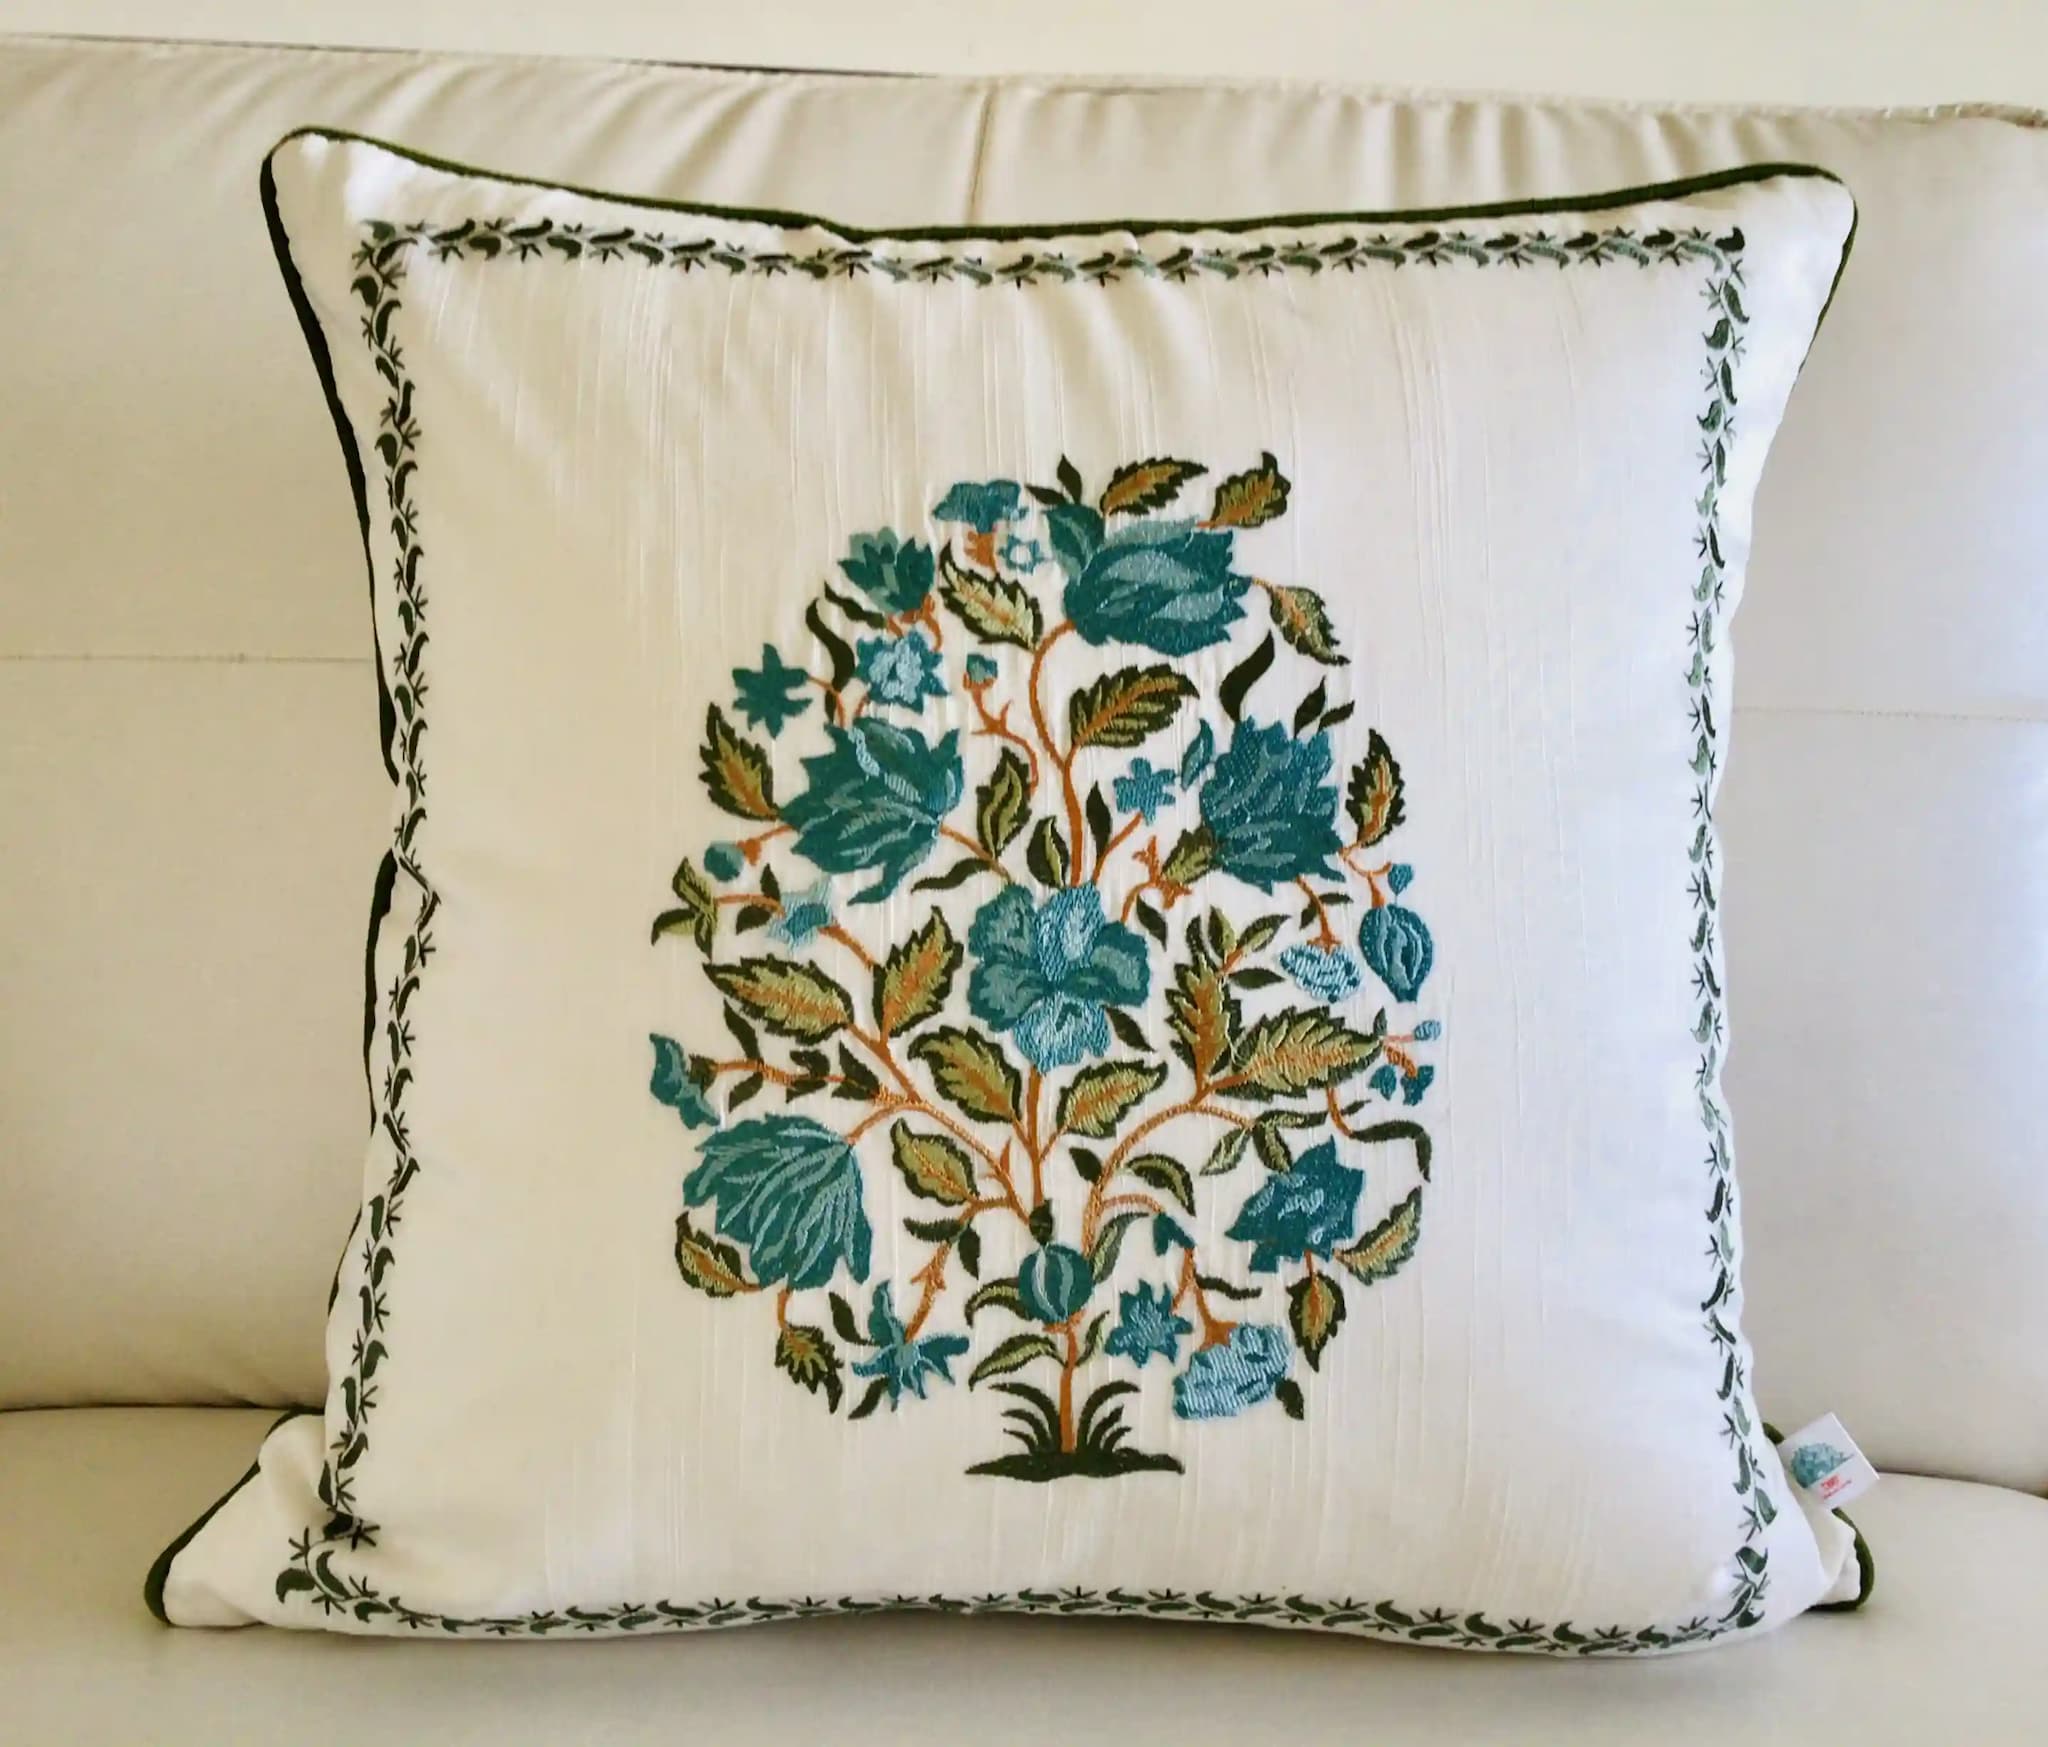 Wild Flower Fields- Embroidered Cotton Silk Cushion Cover- Pastel Blue & Green- Set of 2